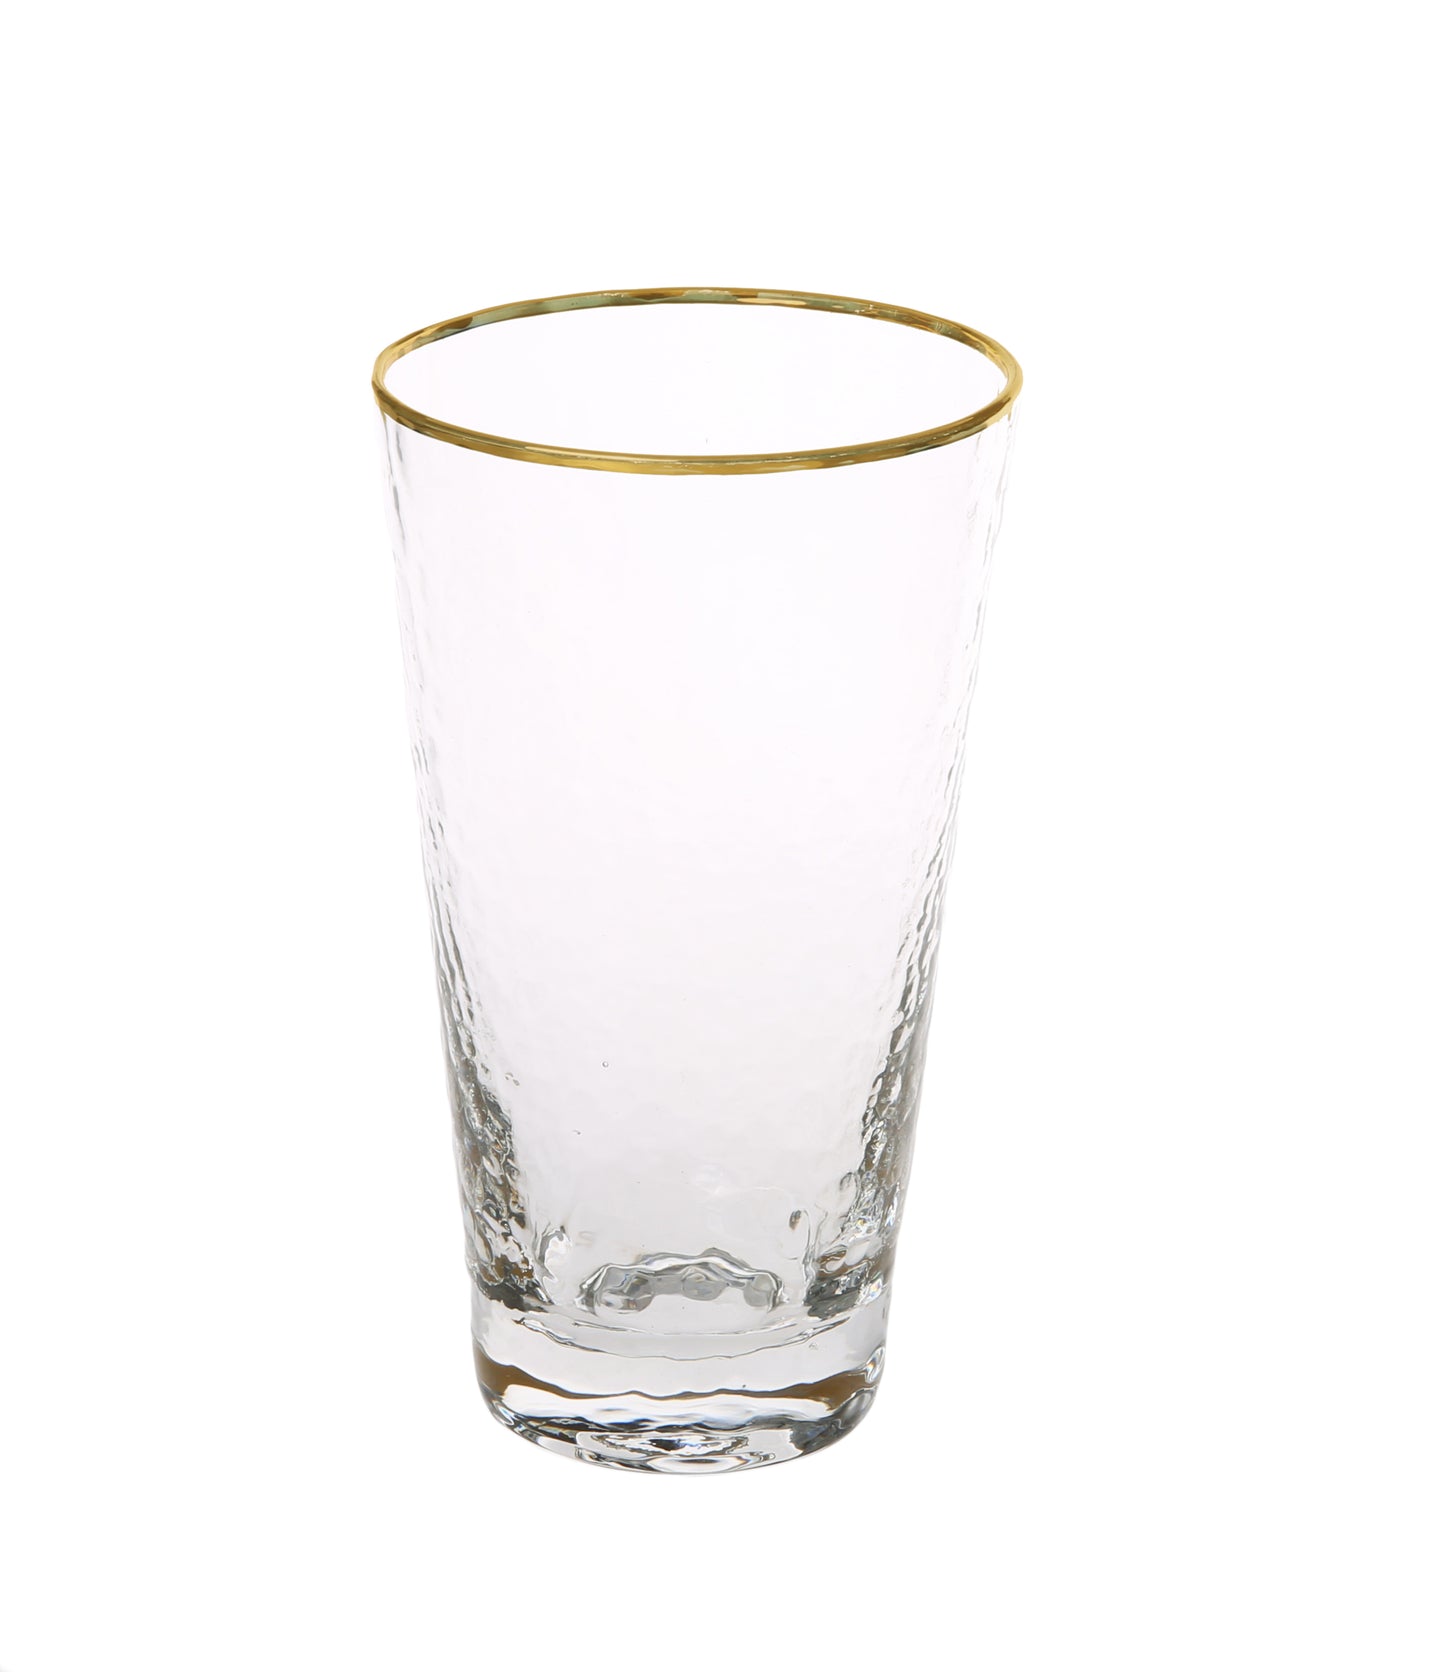 Set Of 6 Tumblers With Simple Gold Design - 3.5